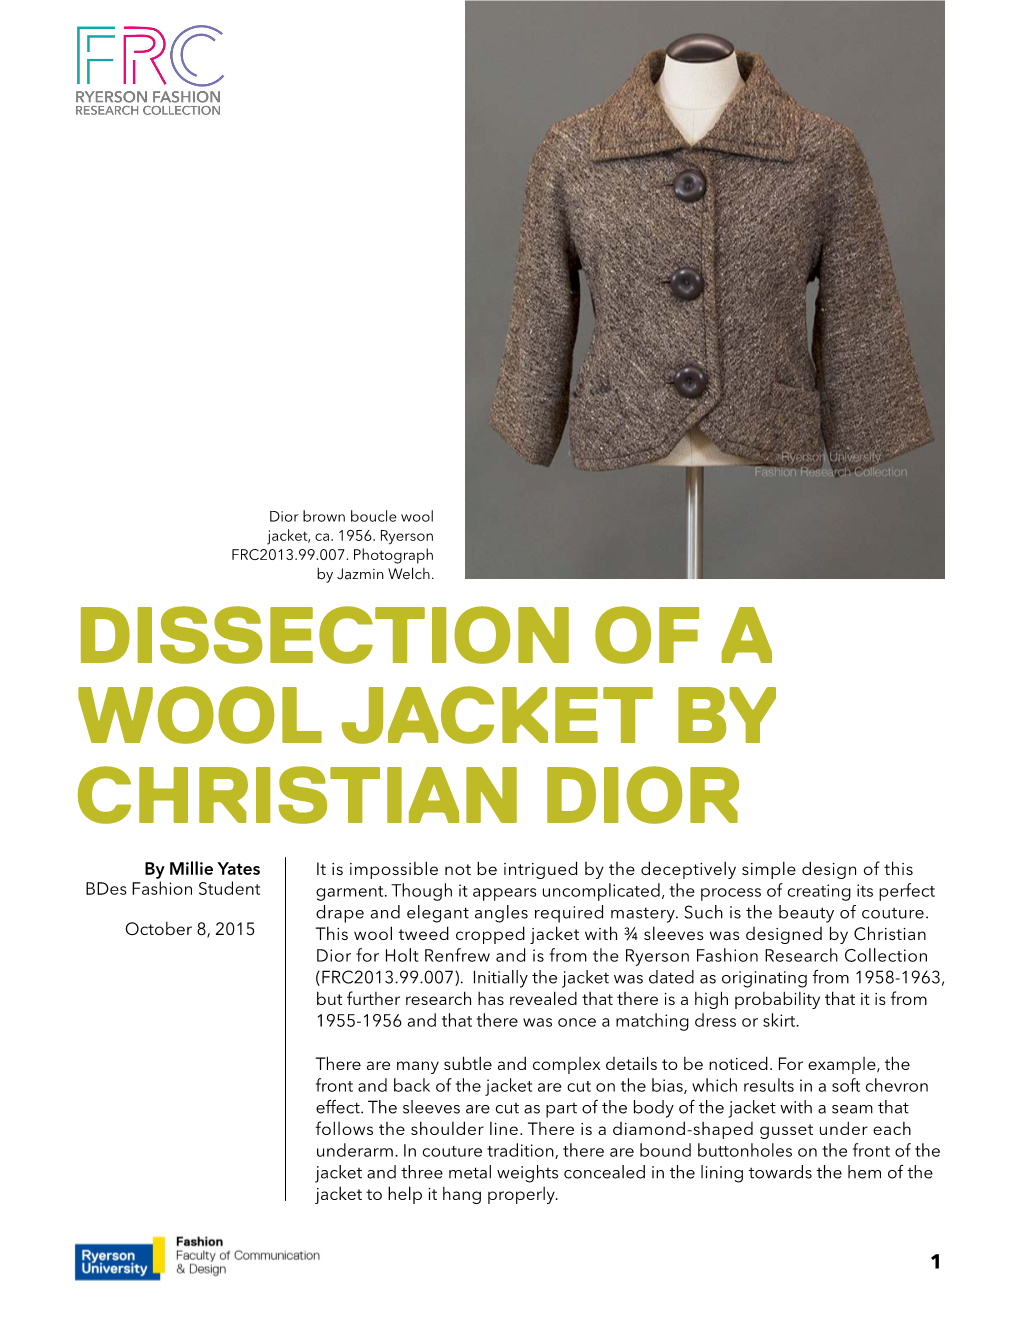 Dissection of a Wool Jacket by Christian Dior